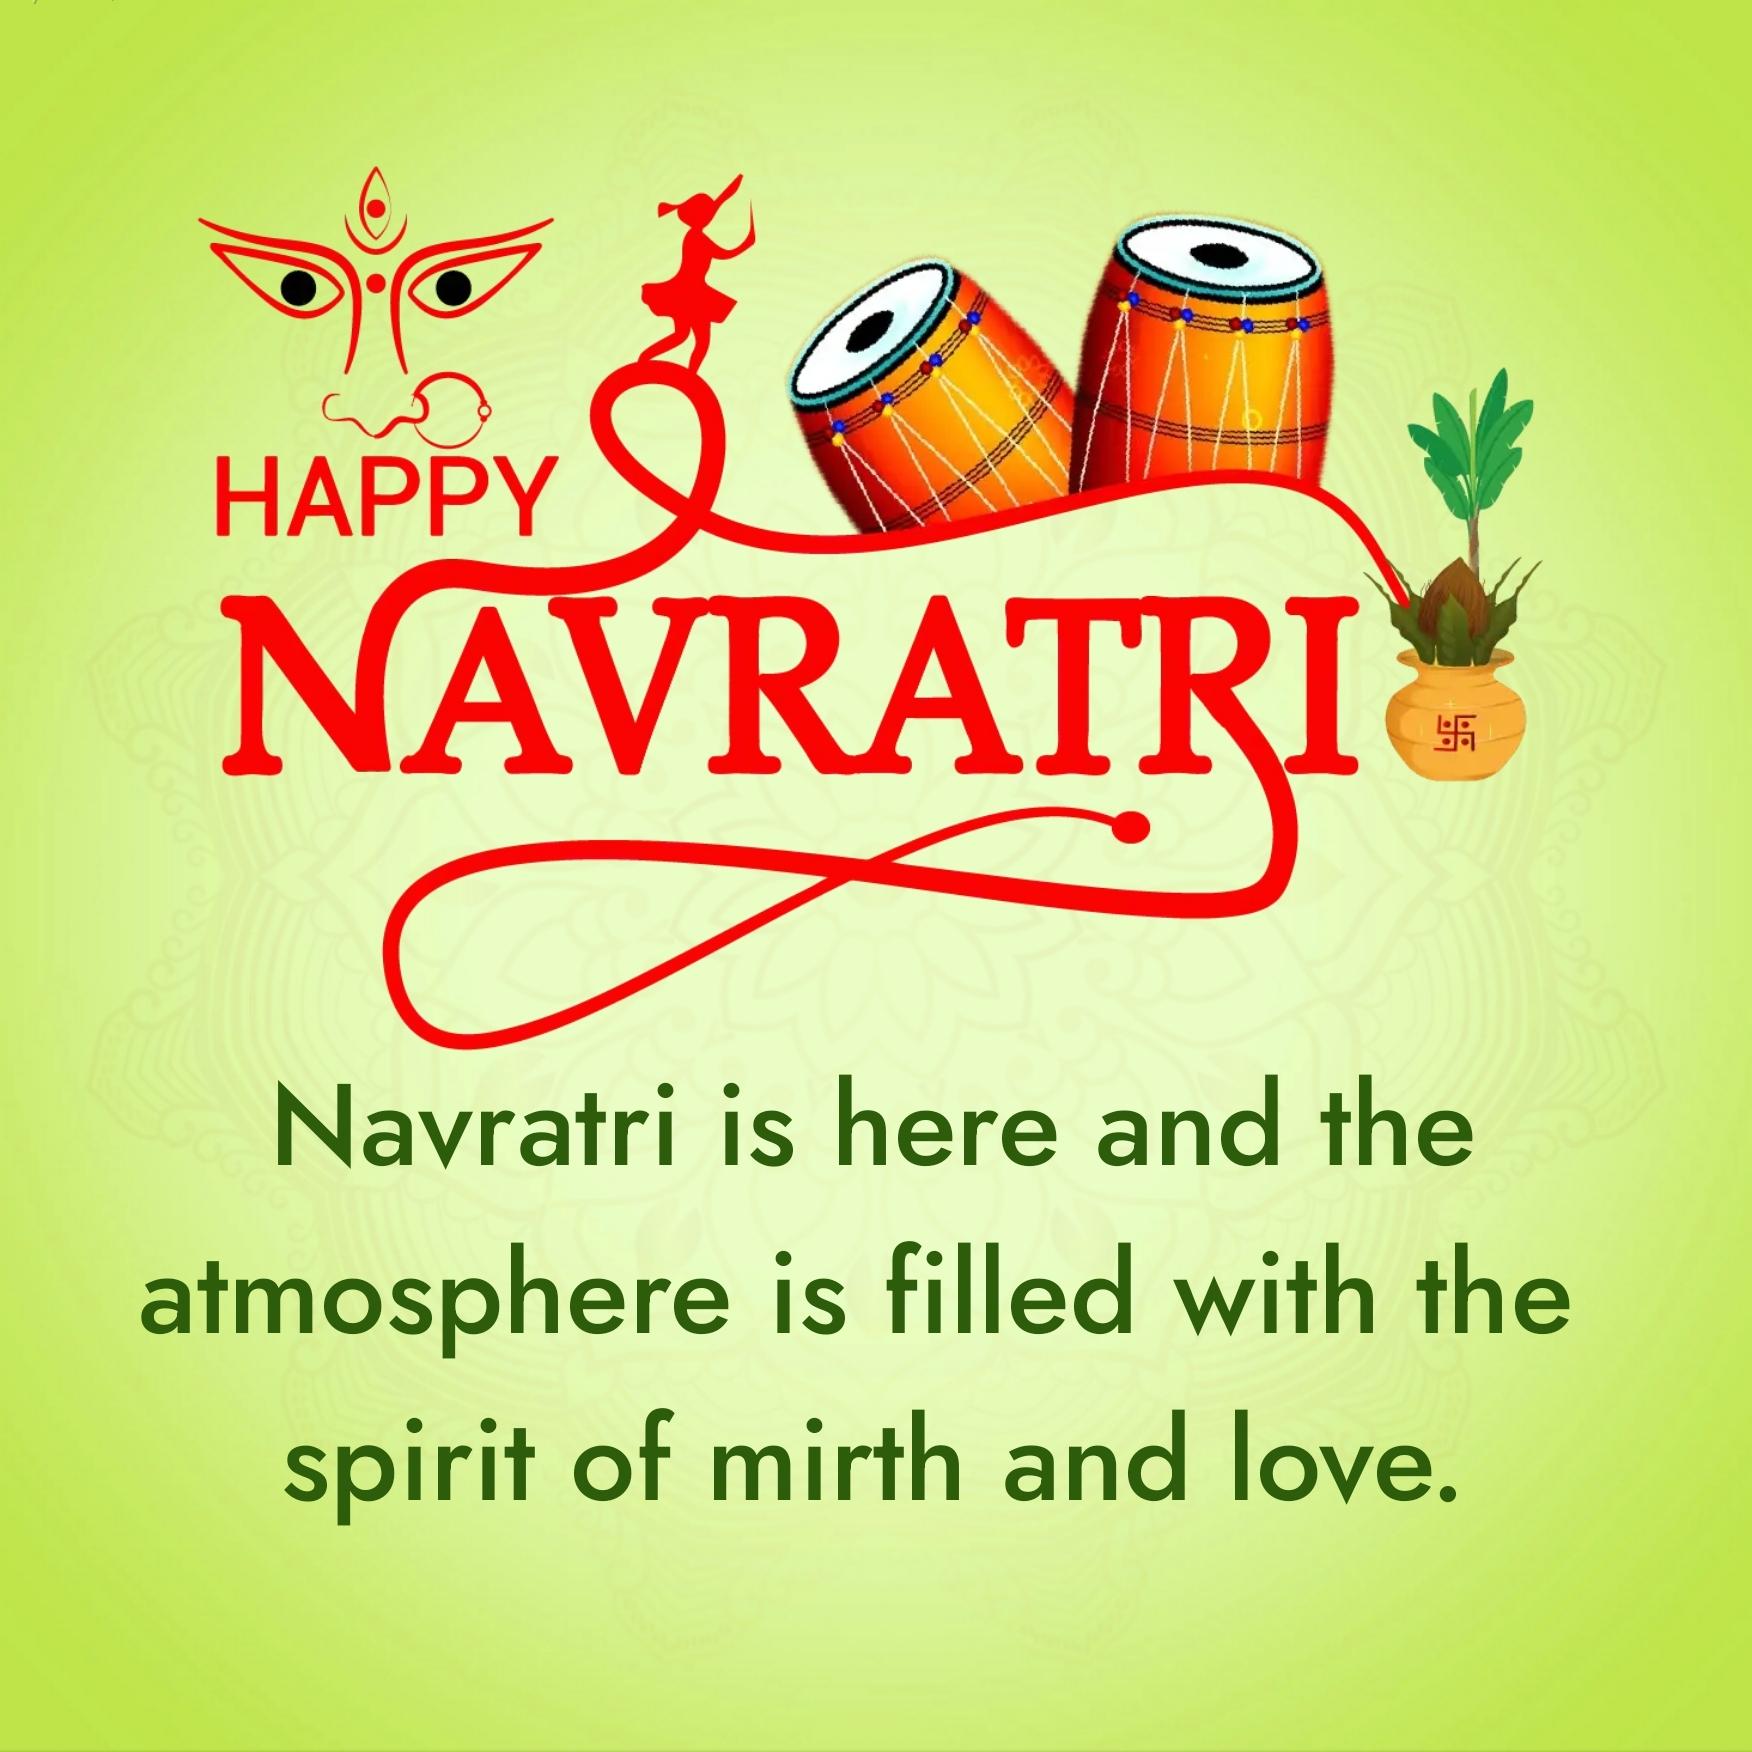 Navratri is here and the atmosphere is filled with